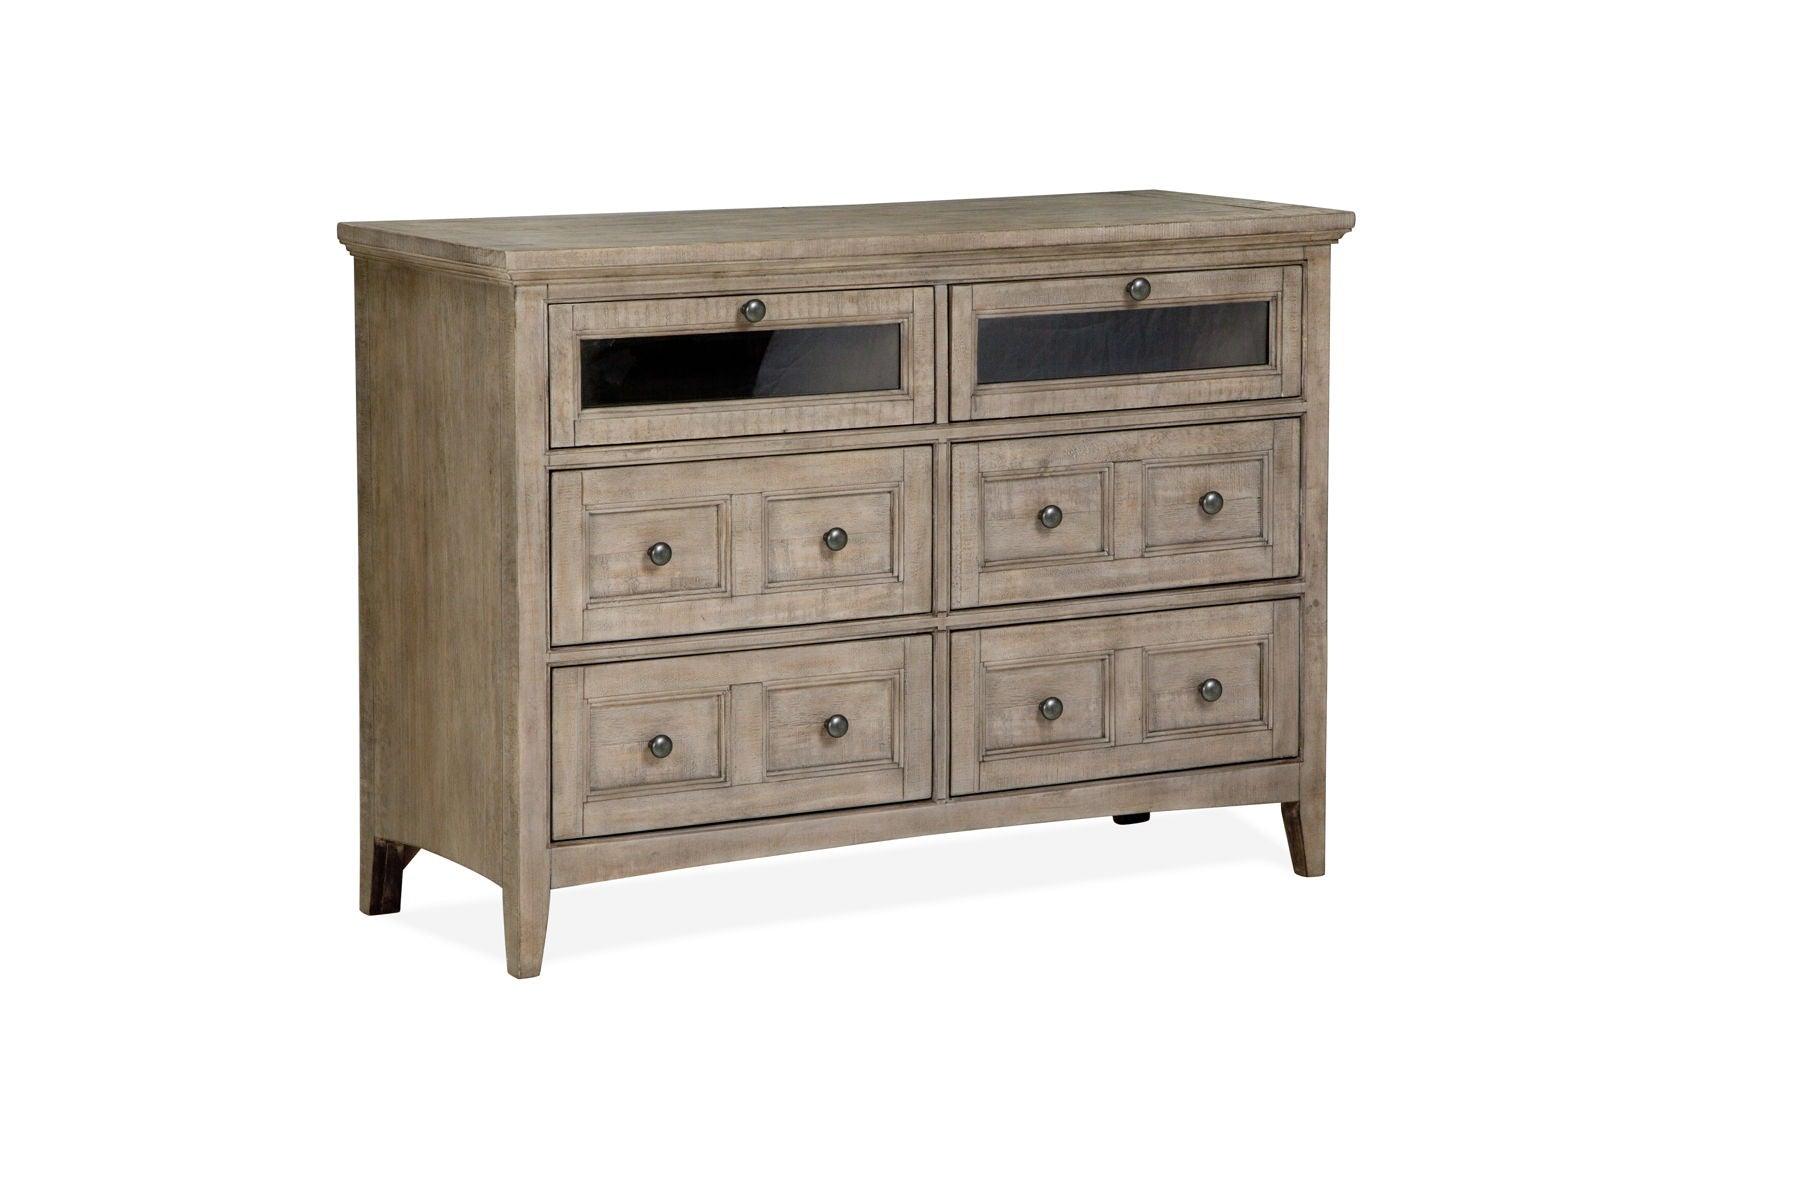 Magnussen Furniture - Paxton Place - Wood Media Chest - Dove Tail Grey - 5th Avenue Furniture